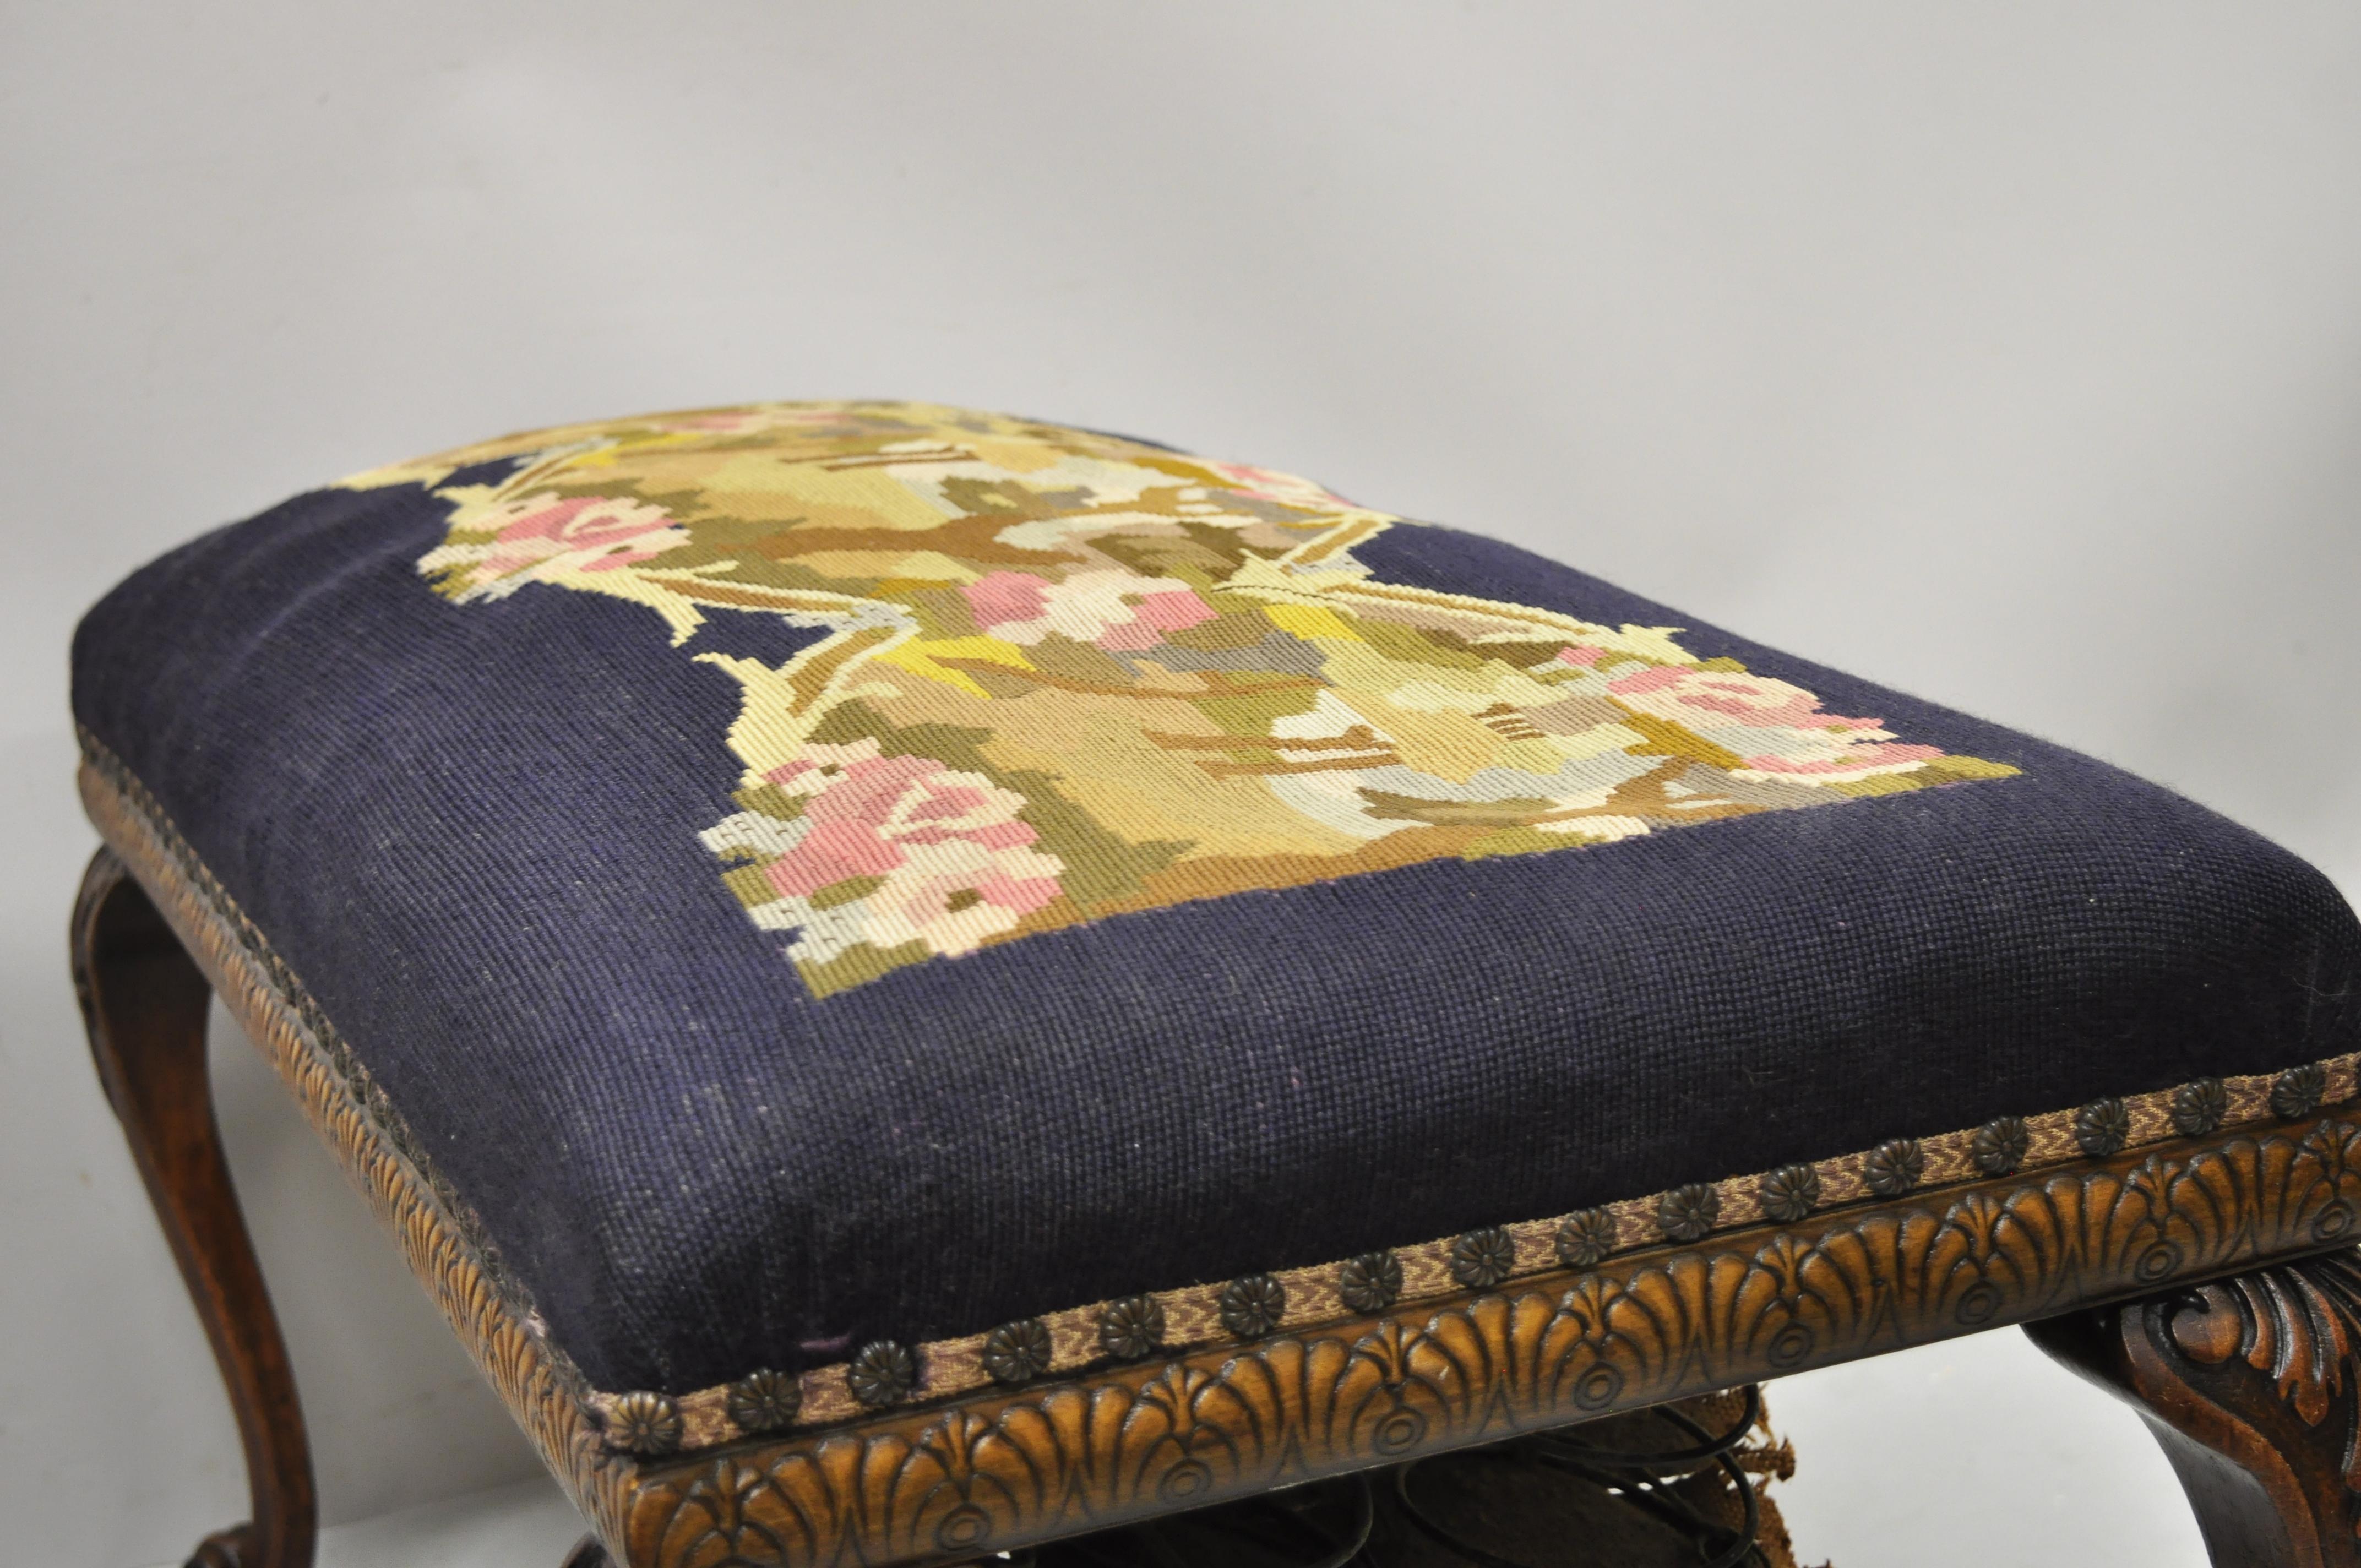 Antique French Victorian Needlepoint Carved Cabriole Leg Mahogany Bench In Good Condition For Sale In Philadelphia, PA